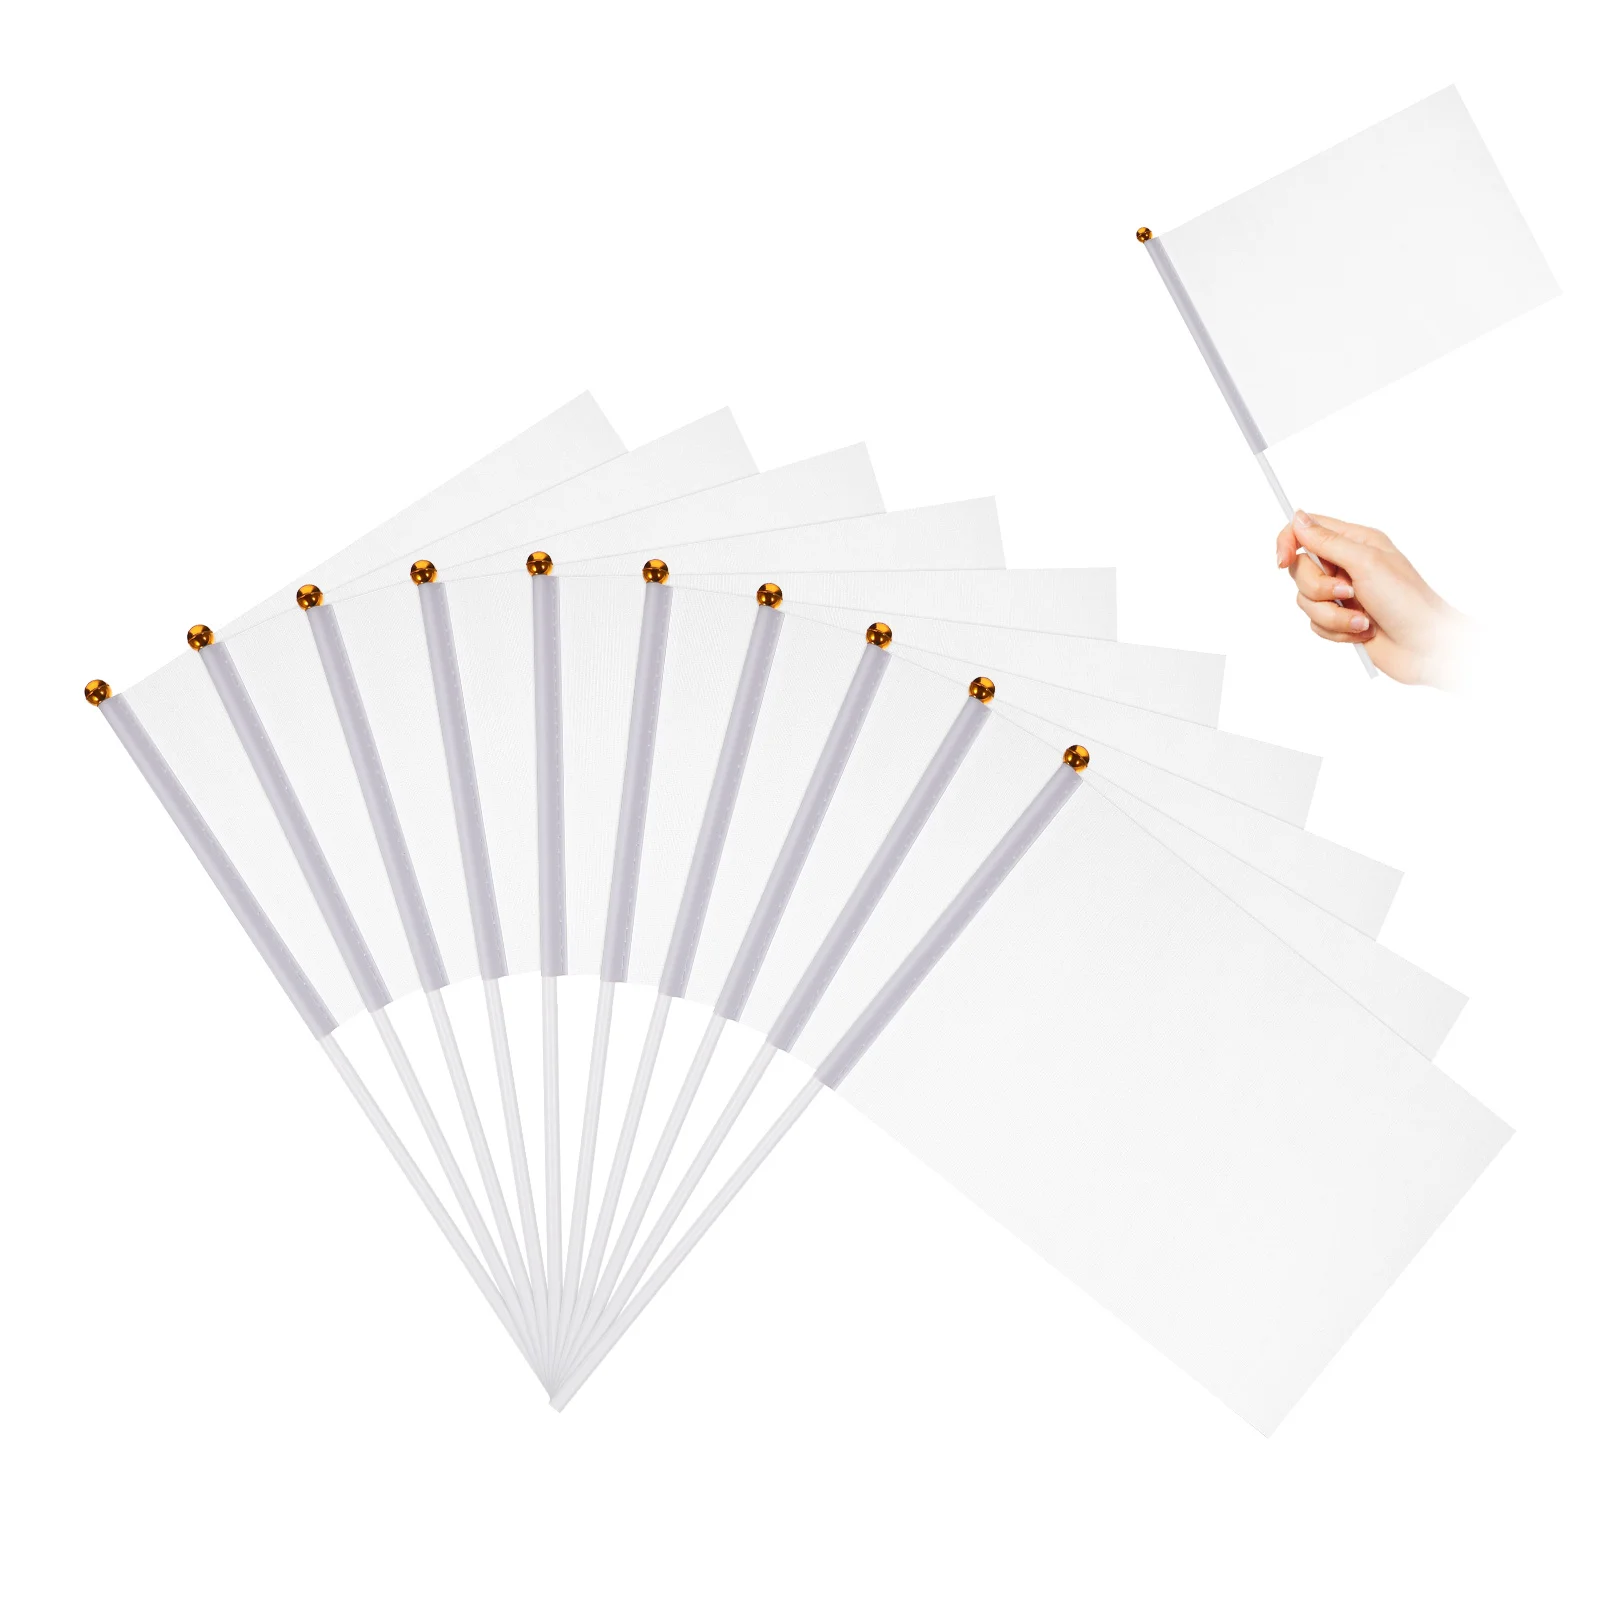 

24 Pcs Blank Banner Hand Held Flags Mini Flag White DIY Graffiti Flag Hand Held White Flags Marker Flags Blank Flags Decorate